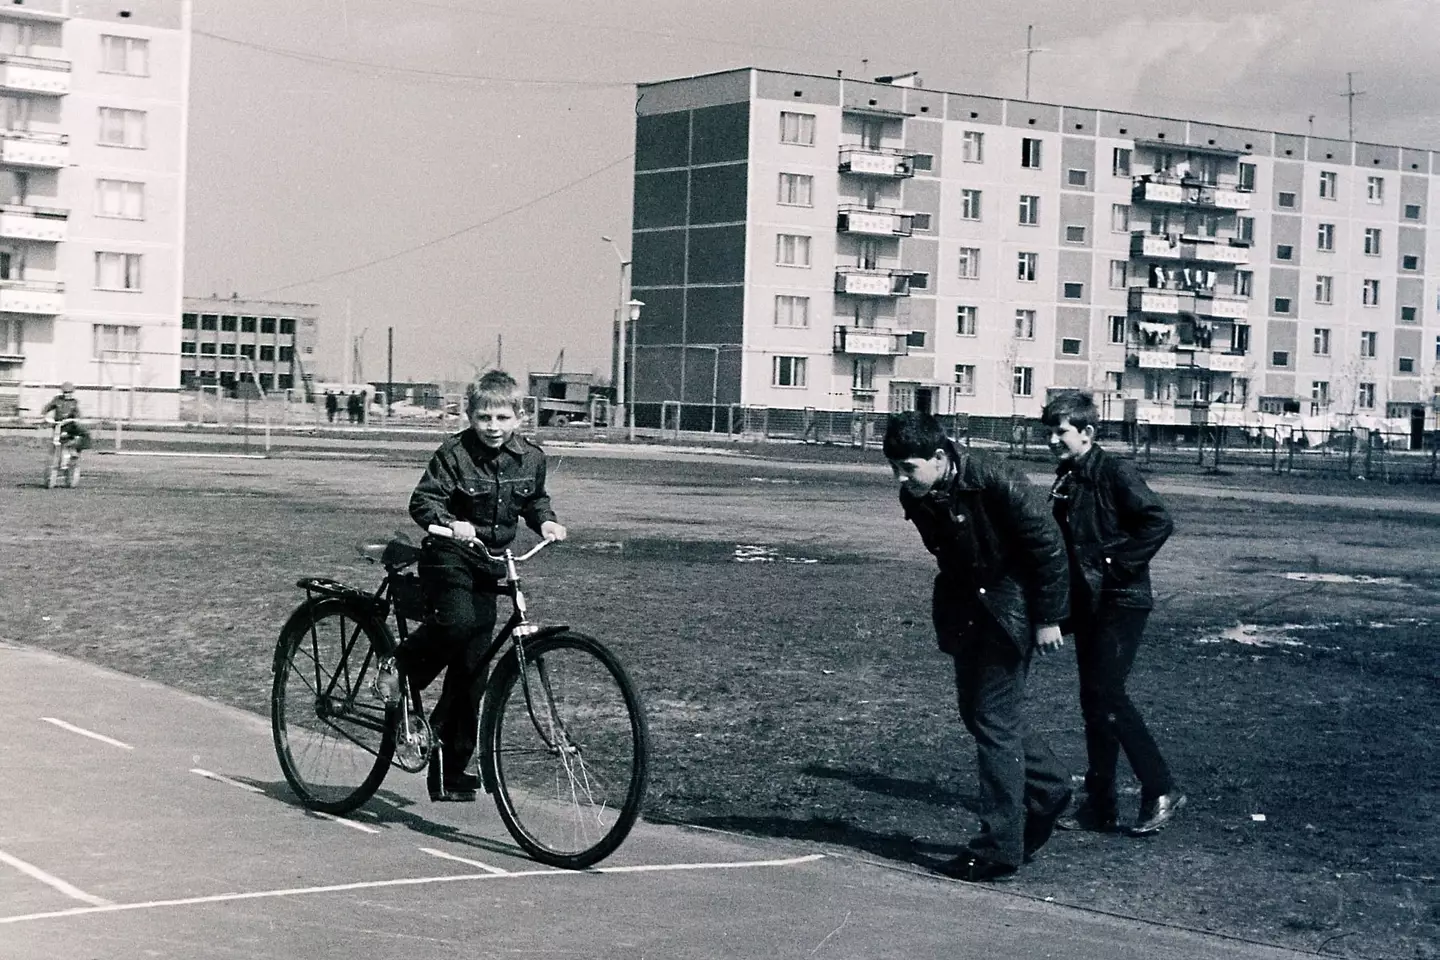 The footage was previously unseen outside of the Soviet Union (